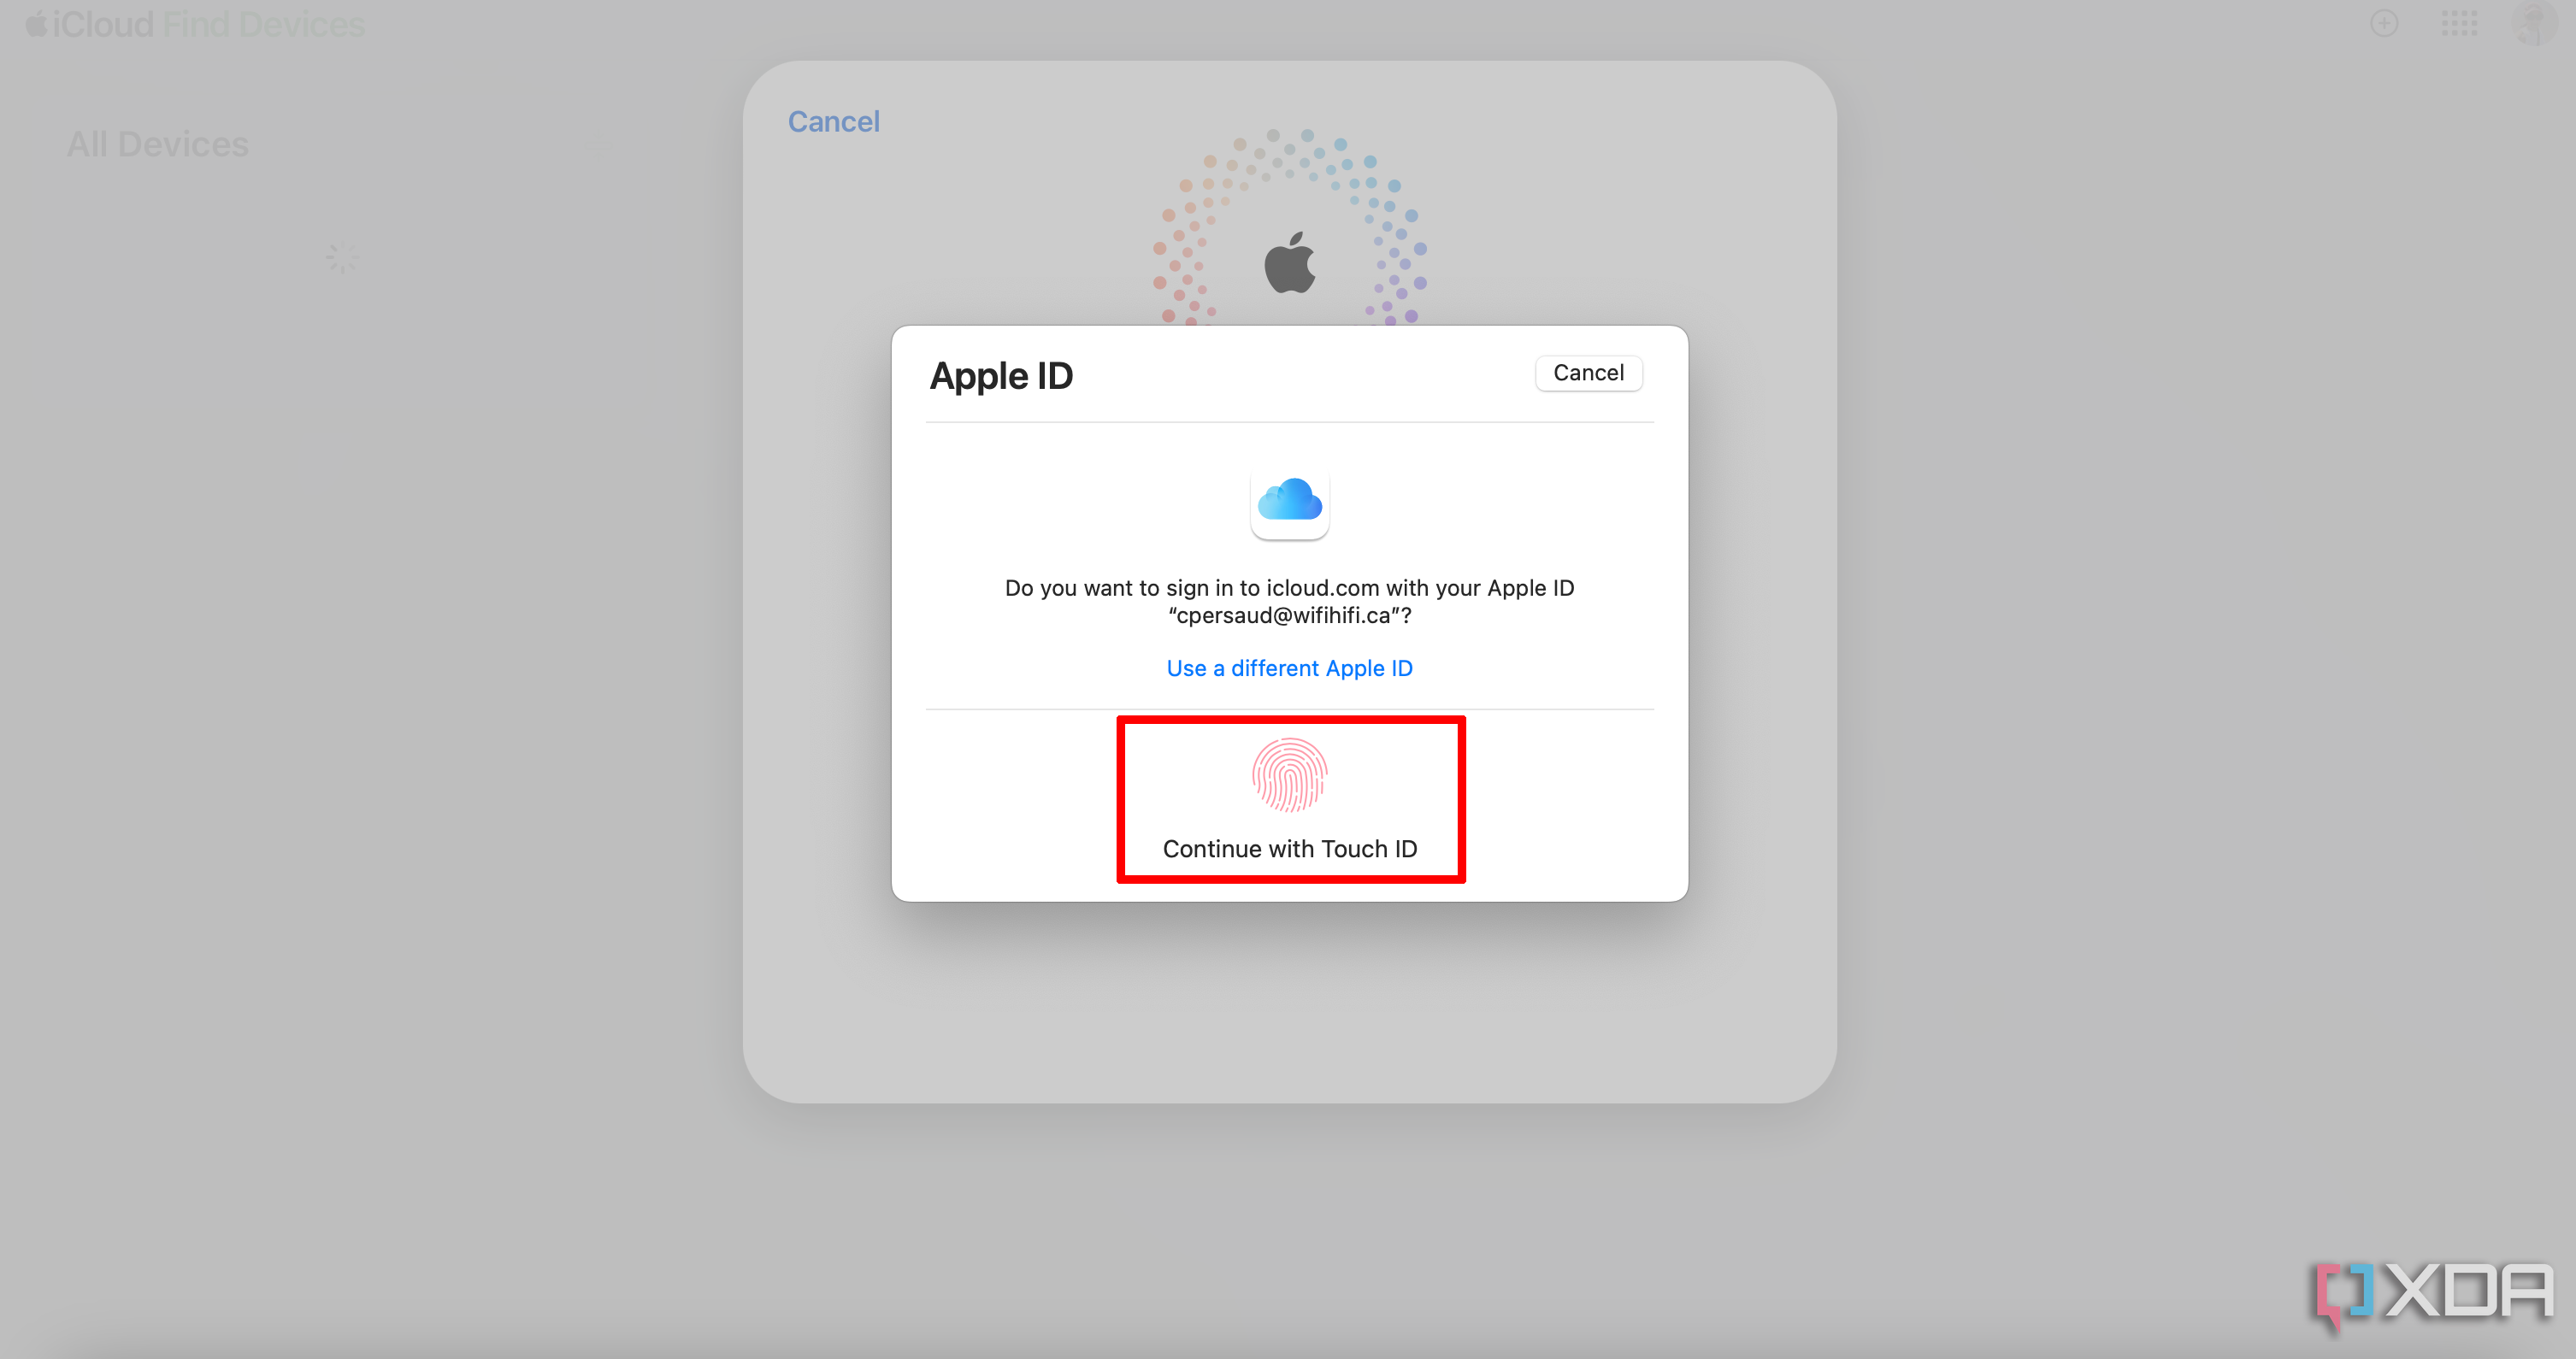 iCloud page showing Apple ID sign in with Touch ID.